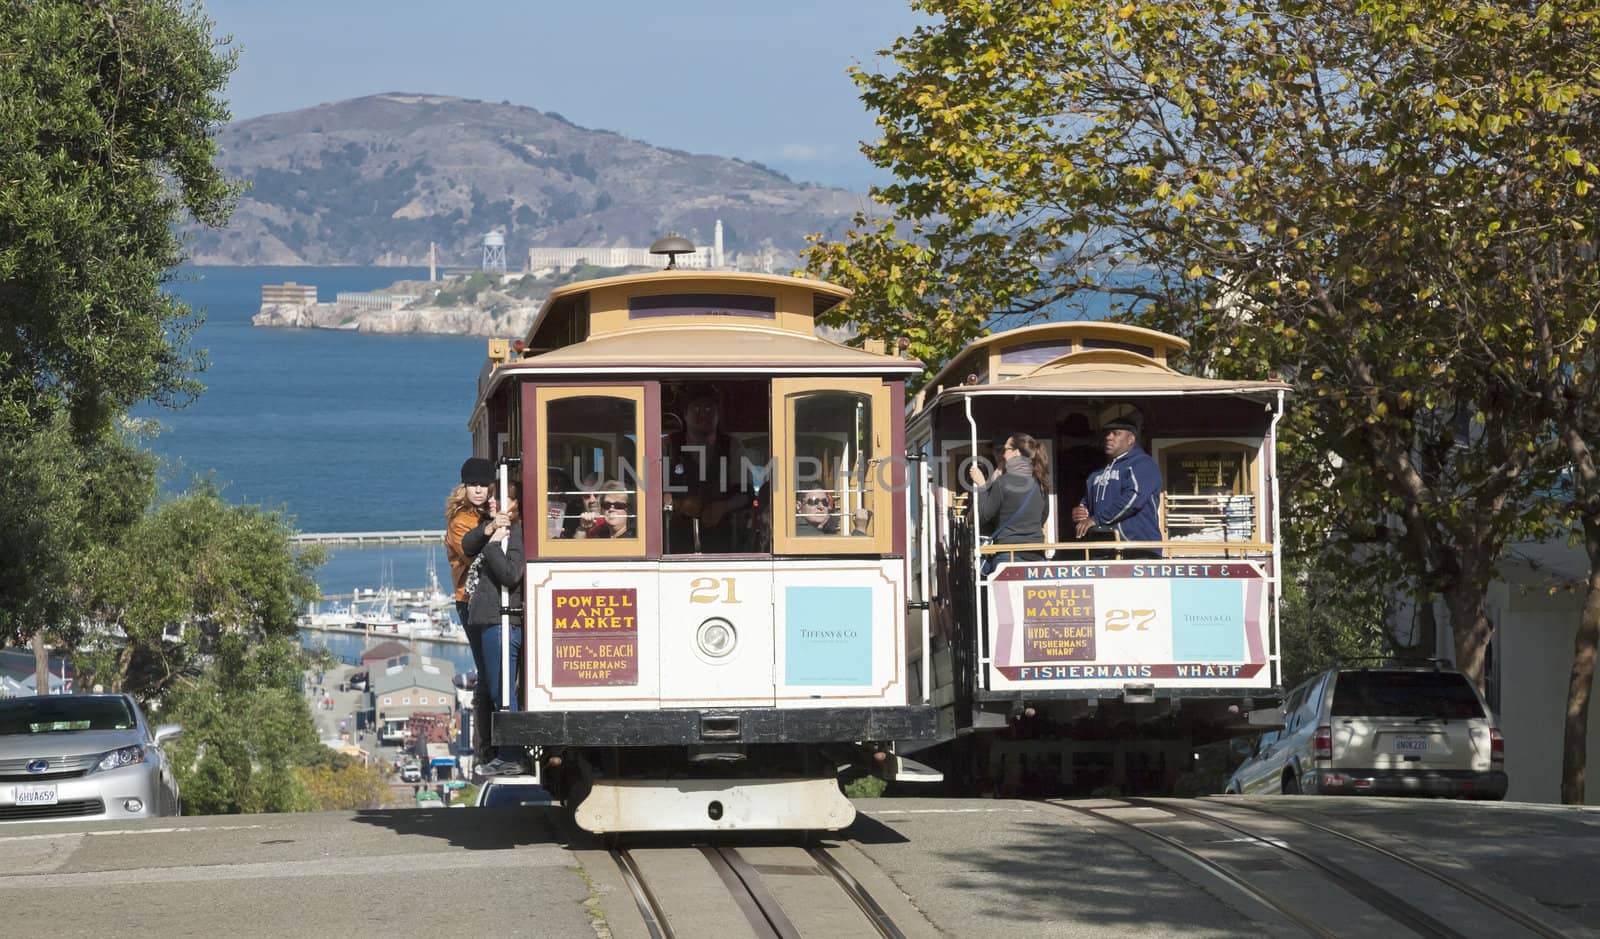 San Francisco-USA, November 2nd, 2012: The passengers are going from the station Hyde by the Cable car Tram to the Center of San Francisco. The Cable car is one of the San Francisco Attractions. Taken on Hyde street around 3pm, Nov 2nd, 2012.